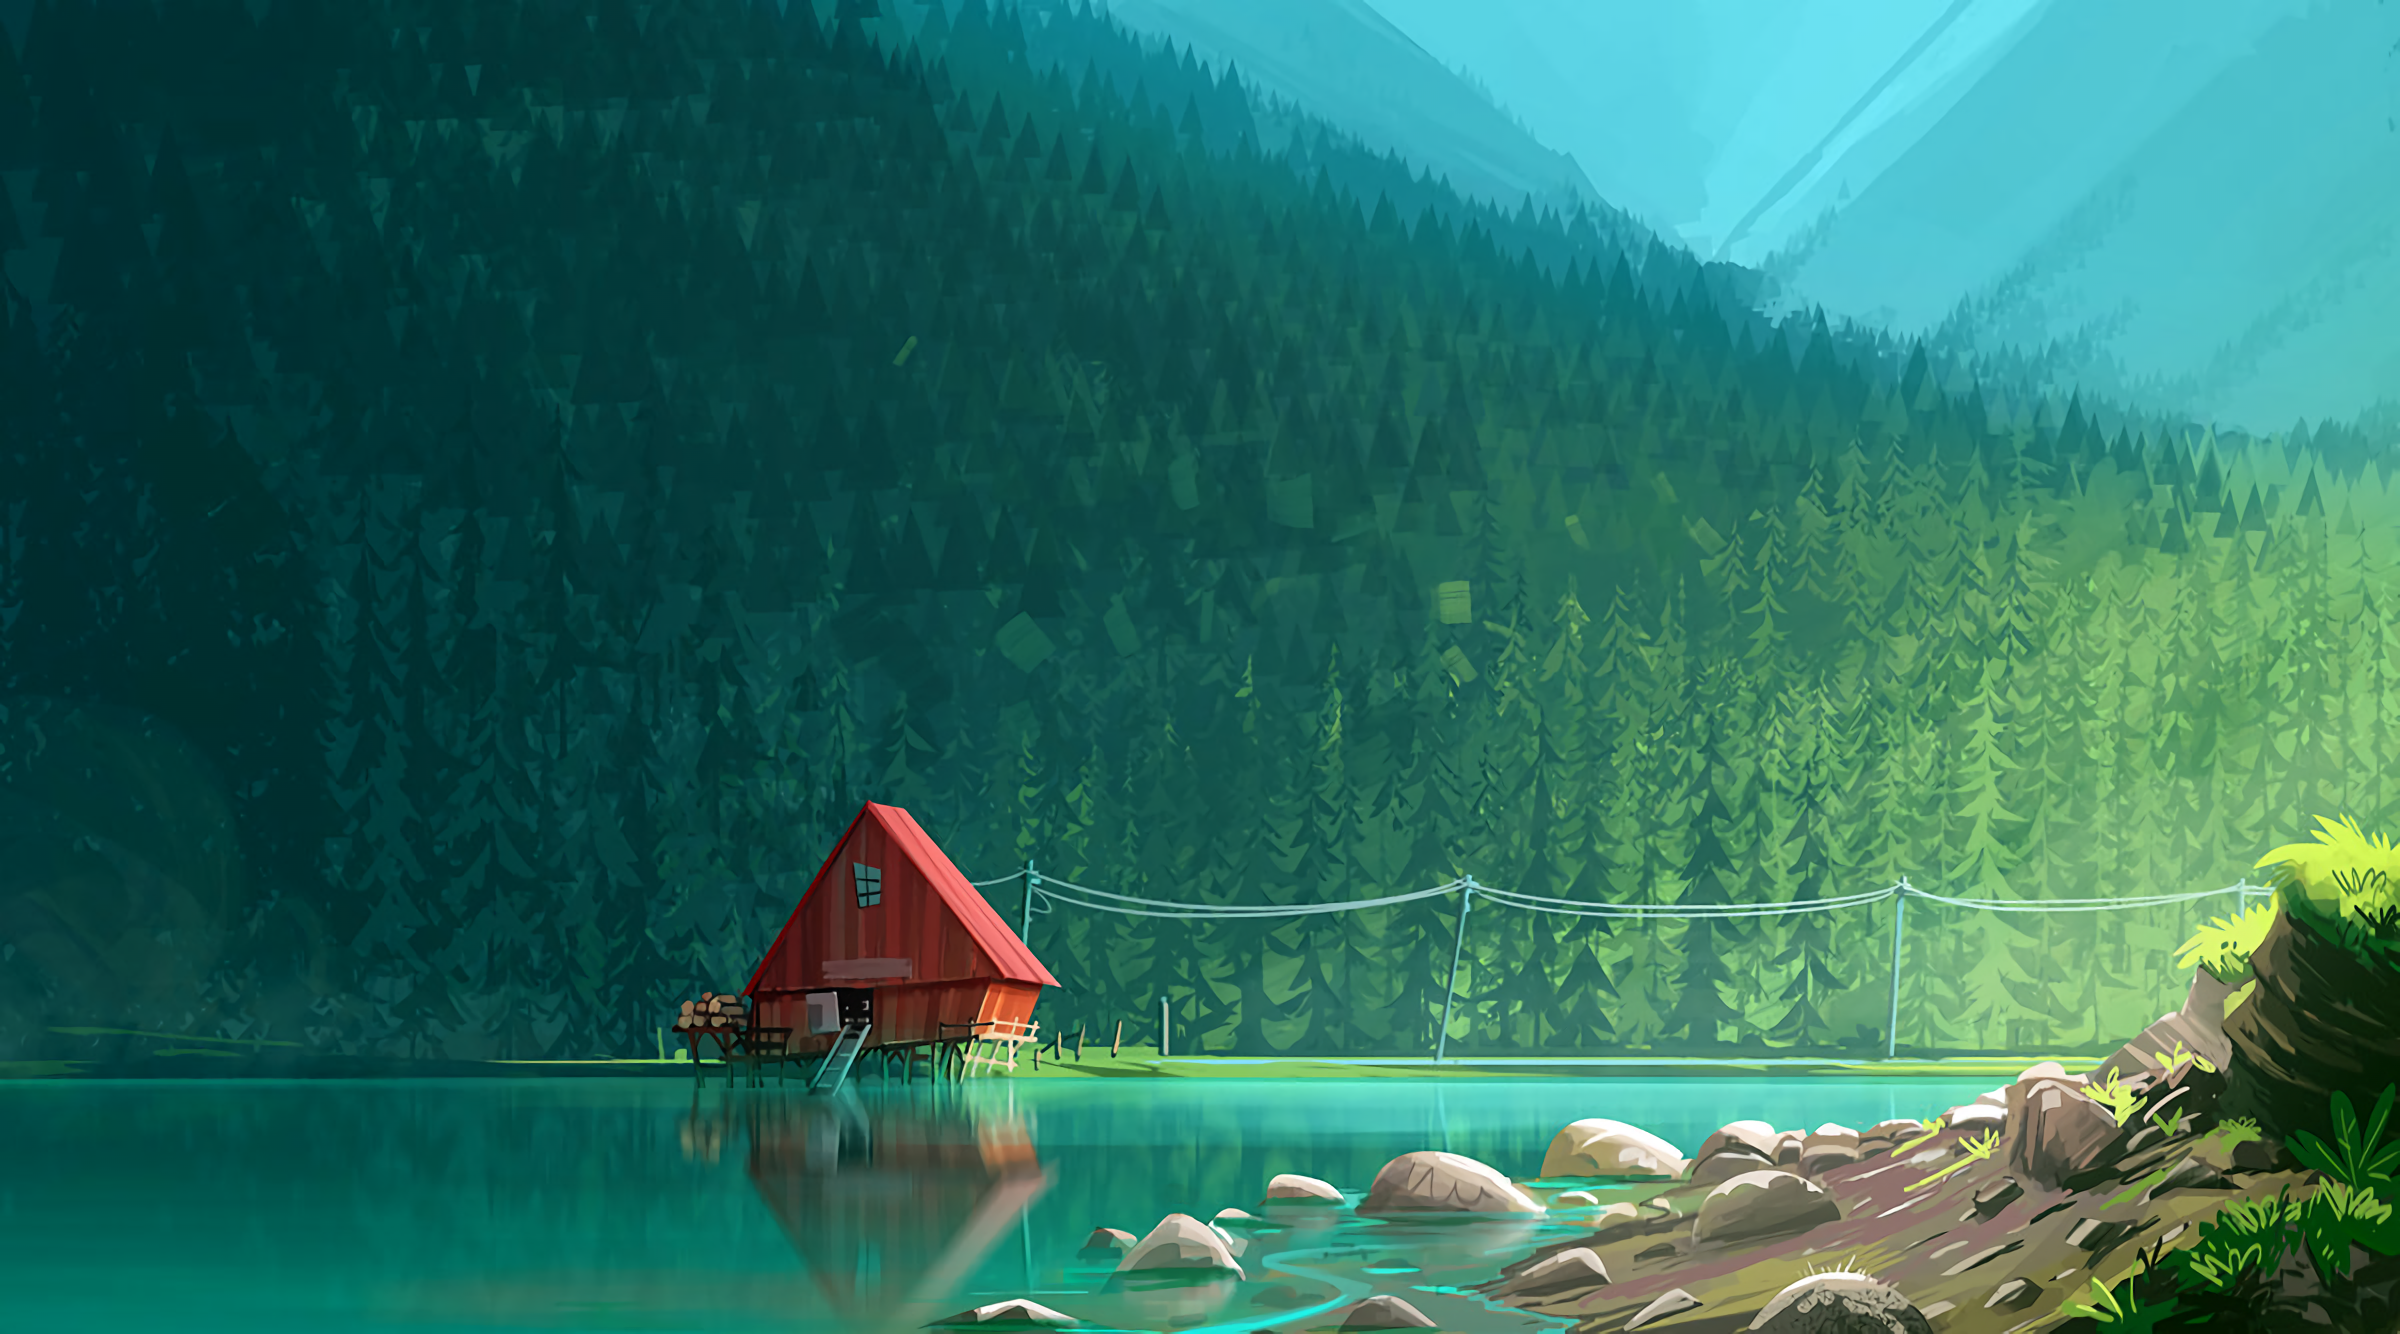 General 2400x1334 forest lake trees mountains digital art landscape water reflection rocks leaves power lines